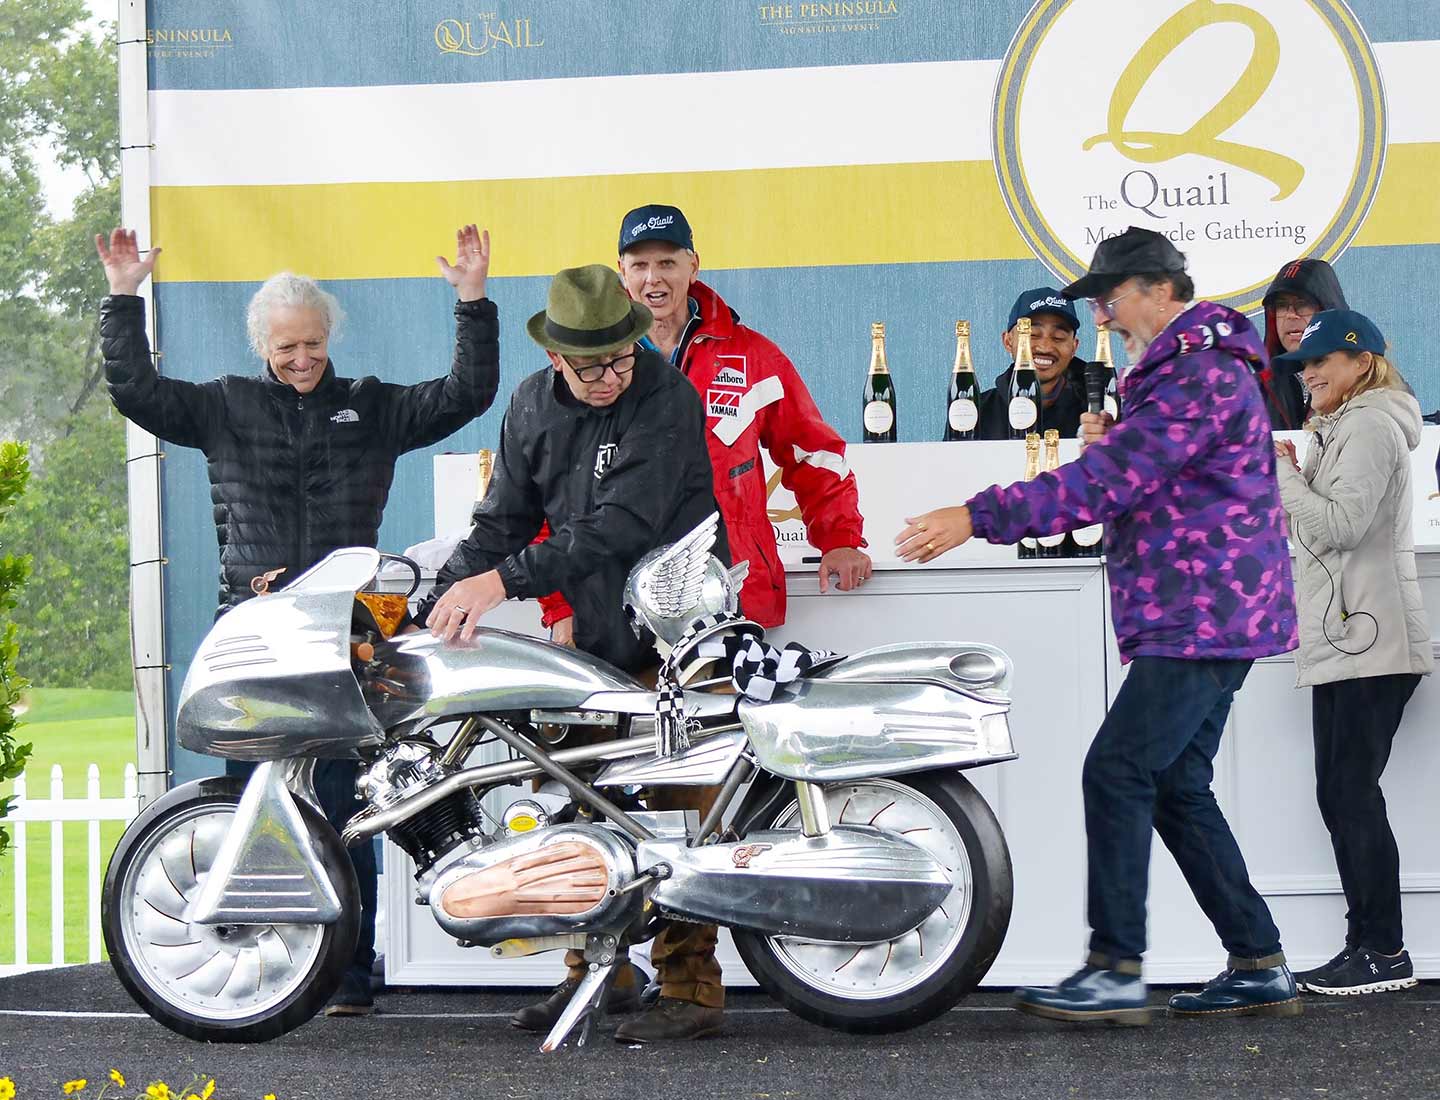 Master of ceremonies Paul d’Orleans seems pretty stoked for Barry Weiss and his wild, Art Deco–inspired Norton Commando, which won the Spirit of the Quail Award.